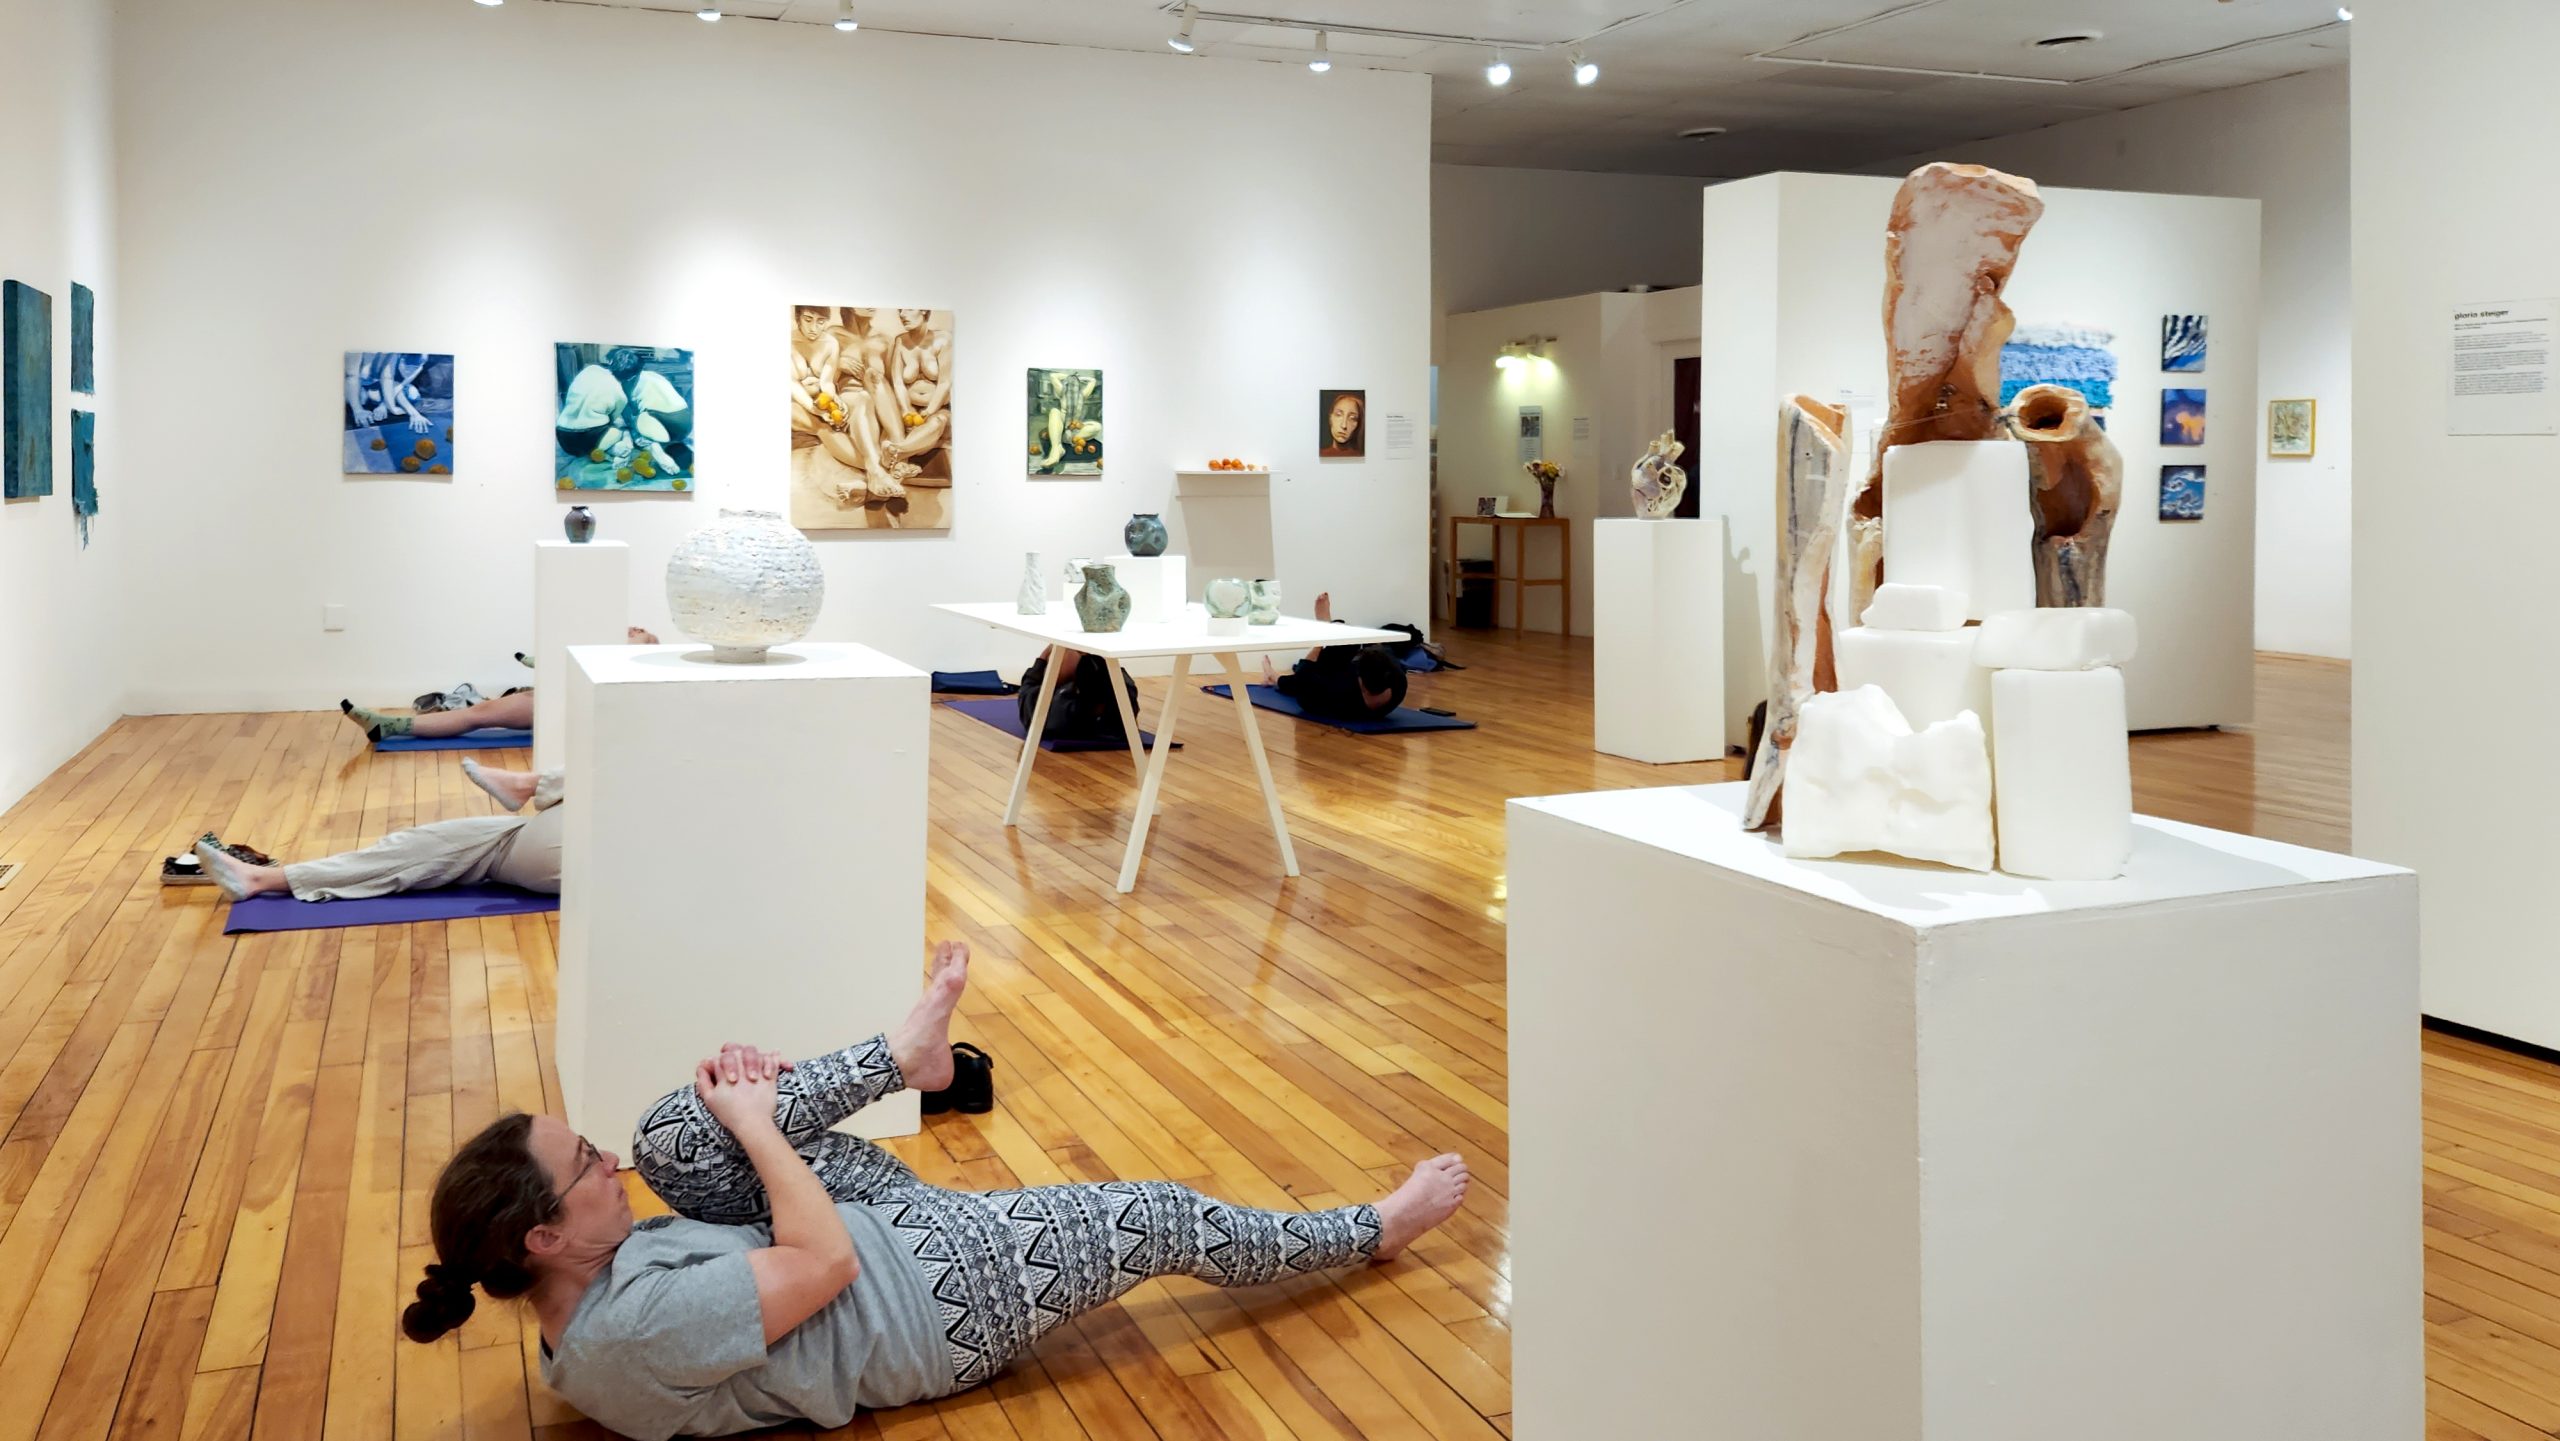 A white walled gallery with wooden floors. Attendees engage in an exercise on yoga mats surrounded by hanging artworks and sculptures on pedastals.